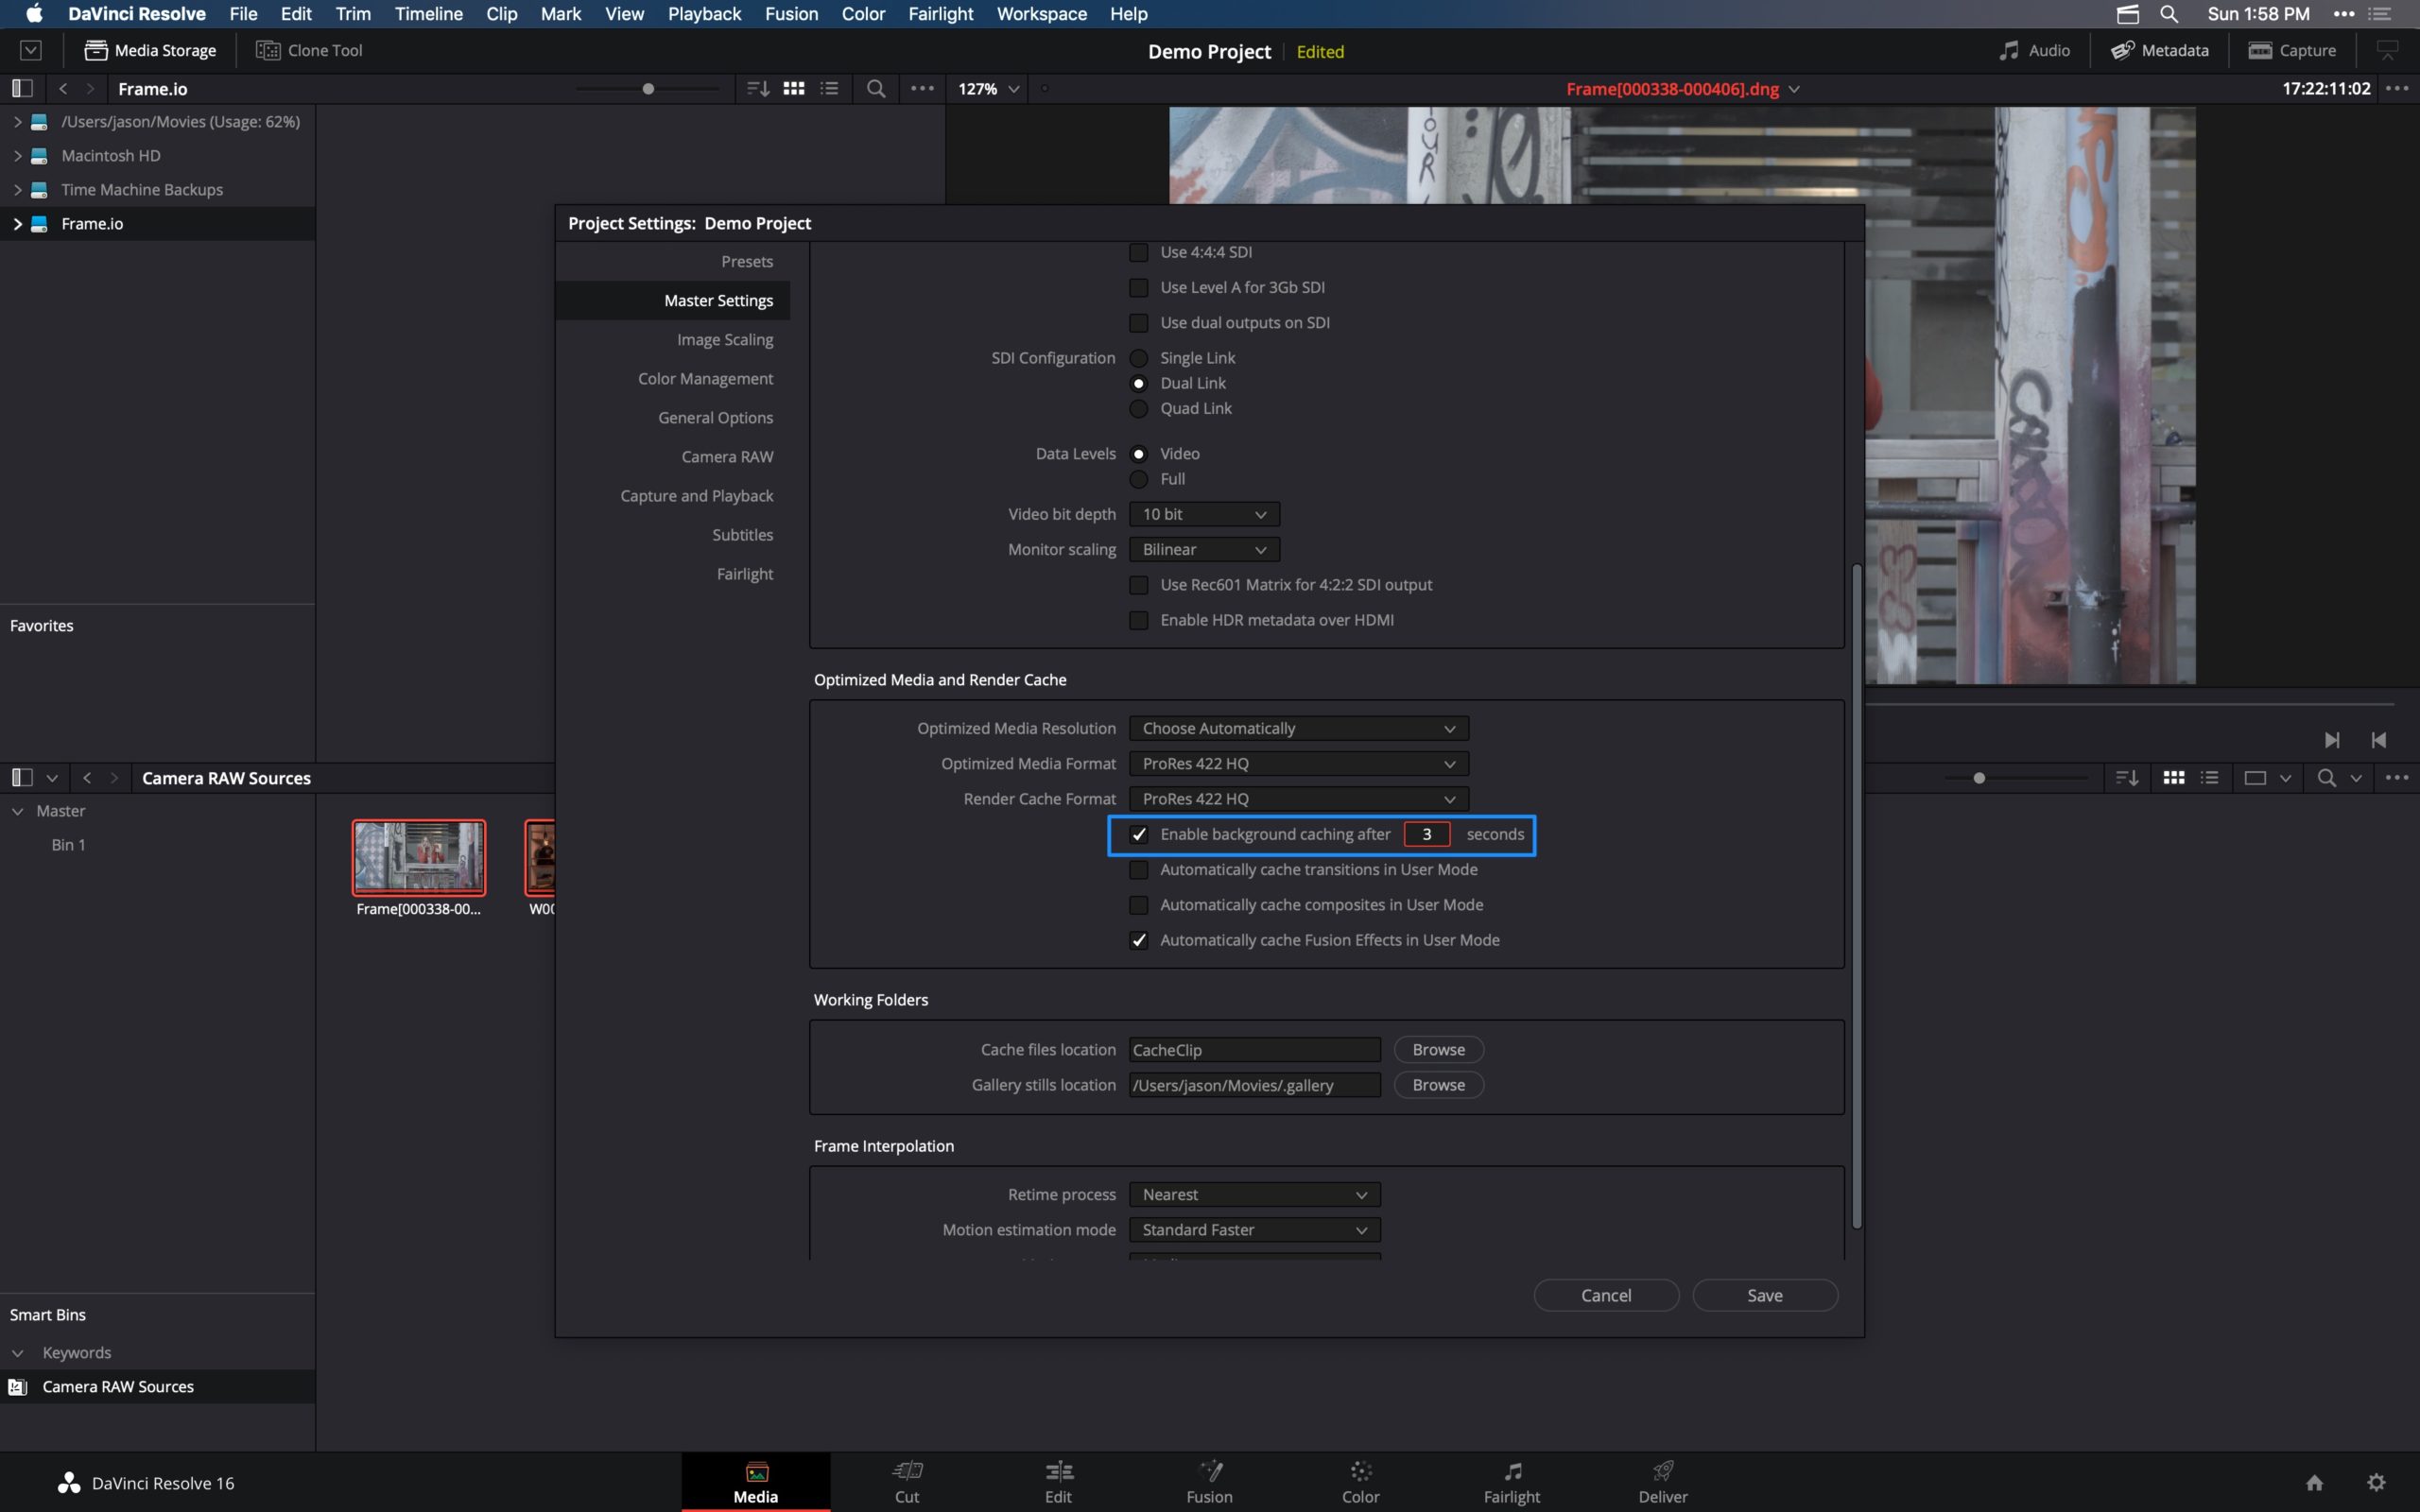 boble Analytisk Optage 5 Tips To Improve Performance in DaVinci Resolve - Frame.io Insider